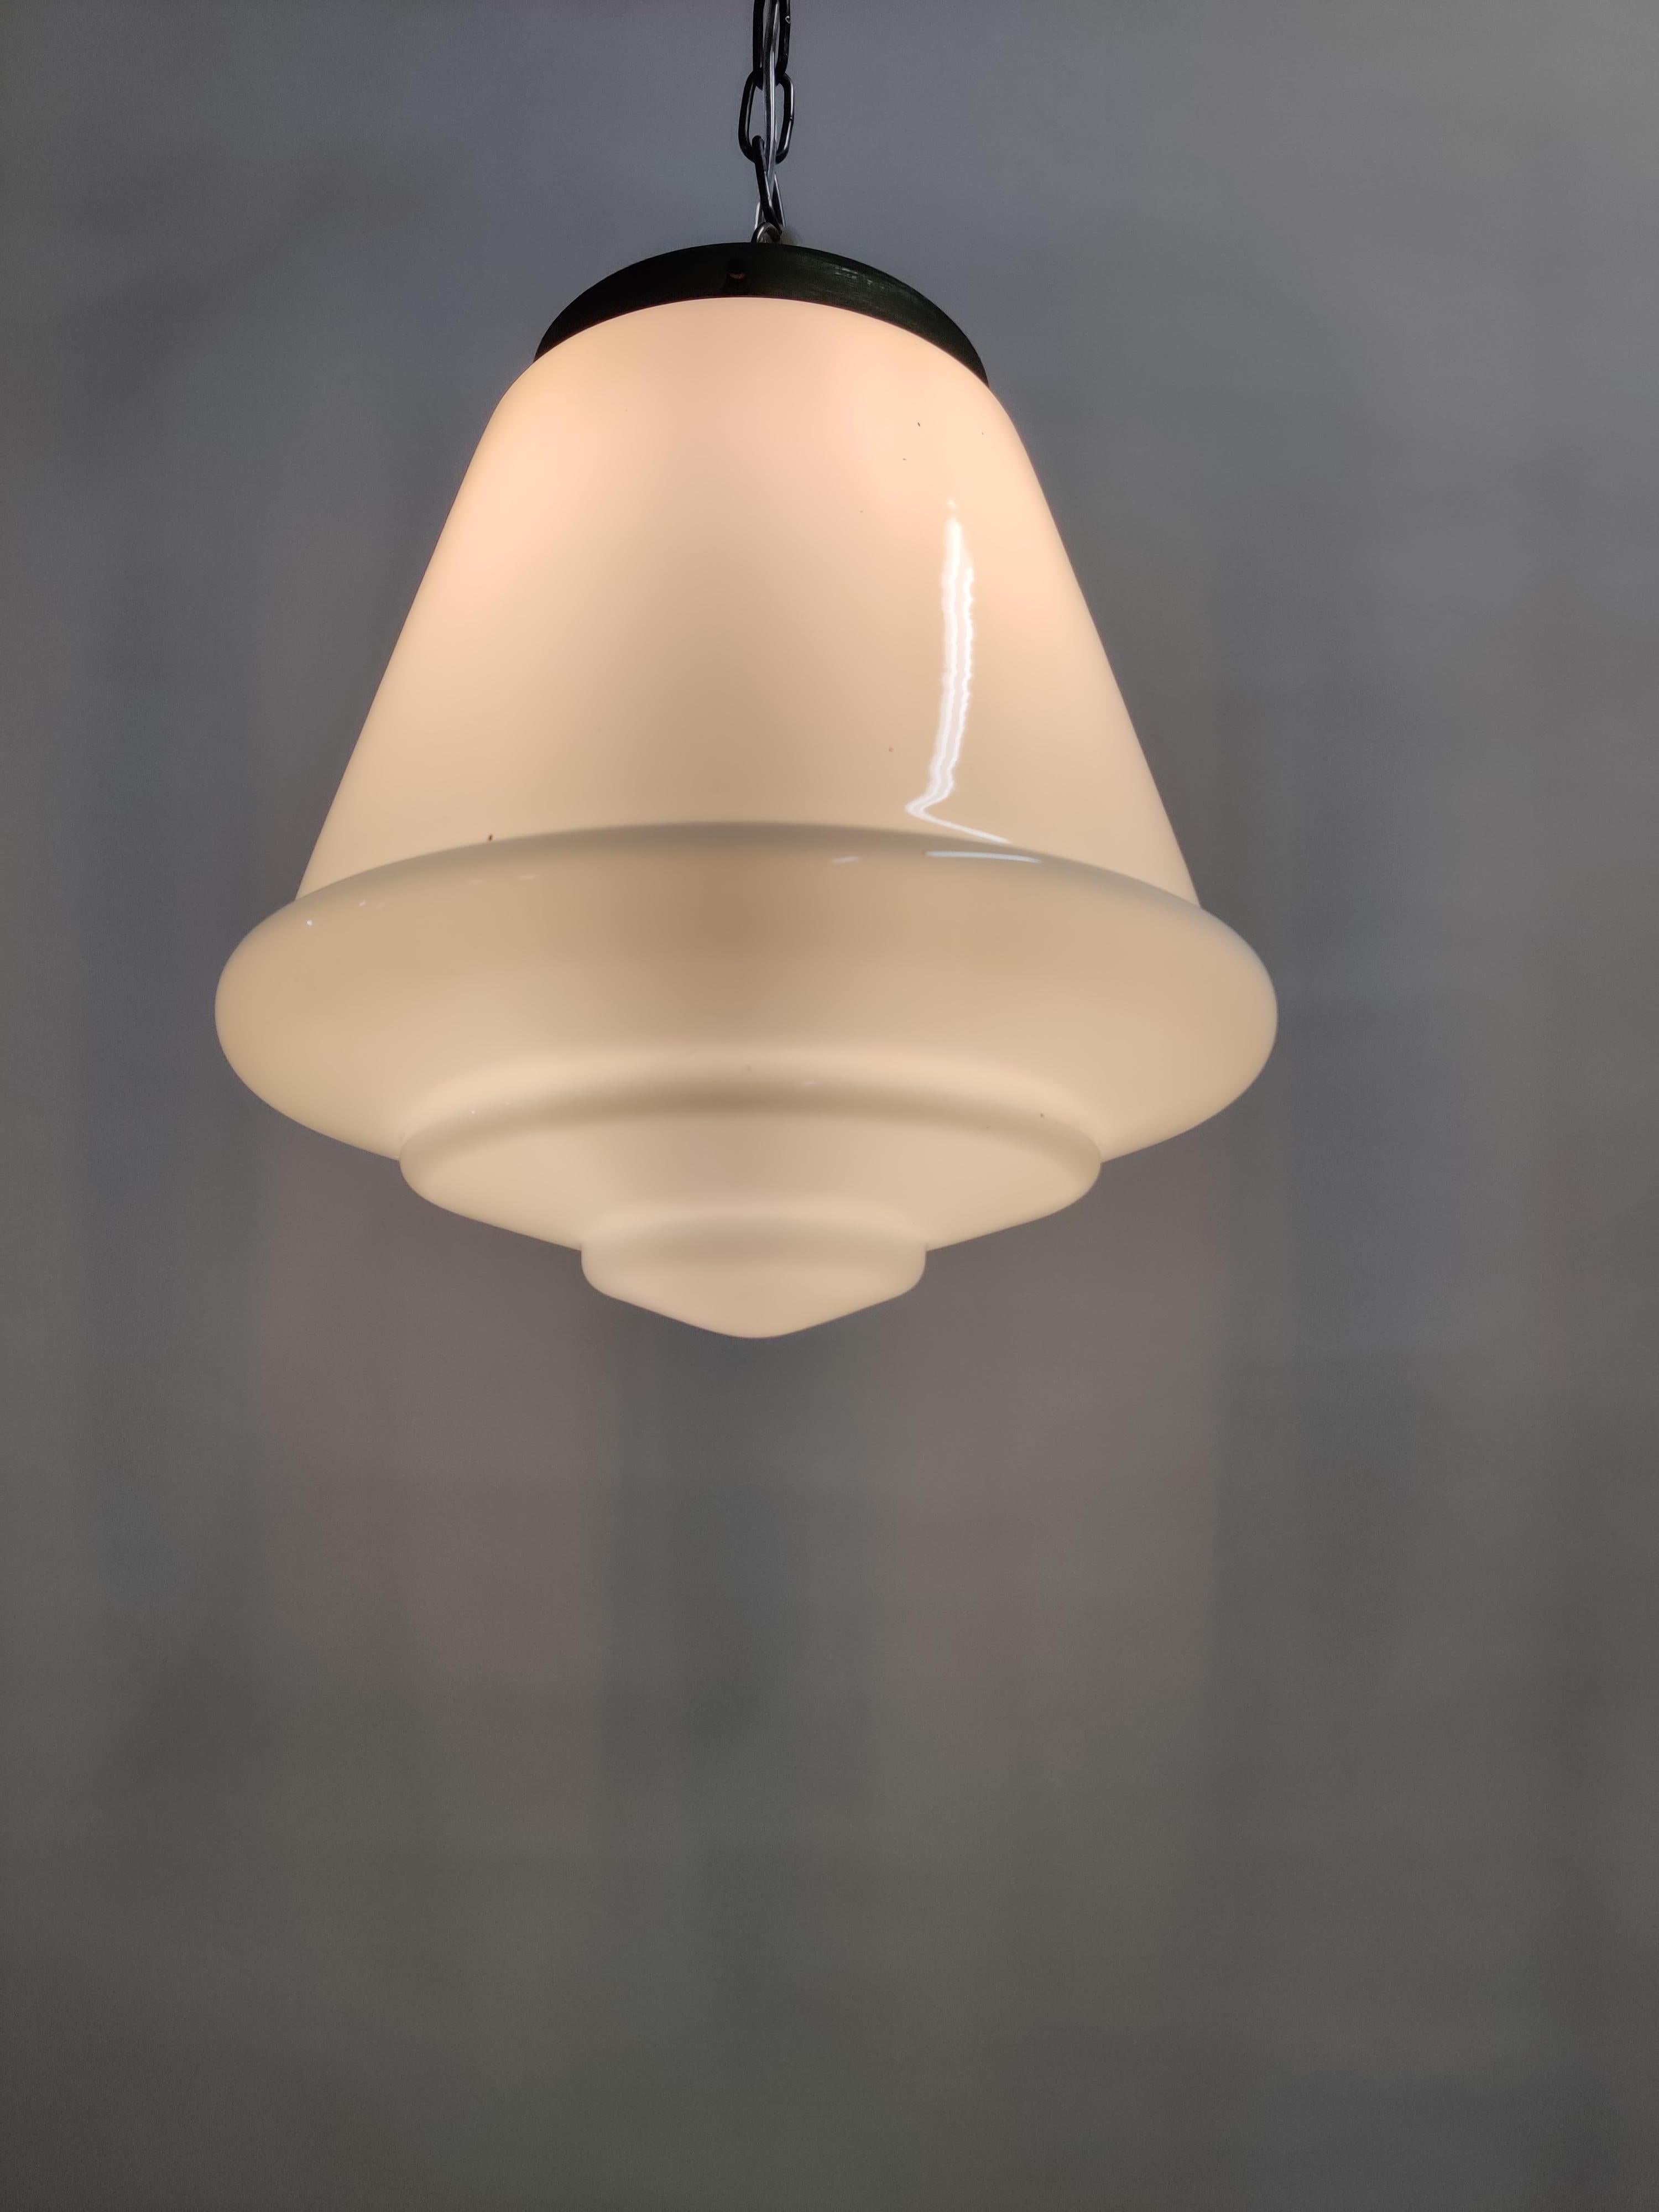 Mid-20th Century Large Stepped Opaline Pendant Light 1930s, France